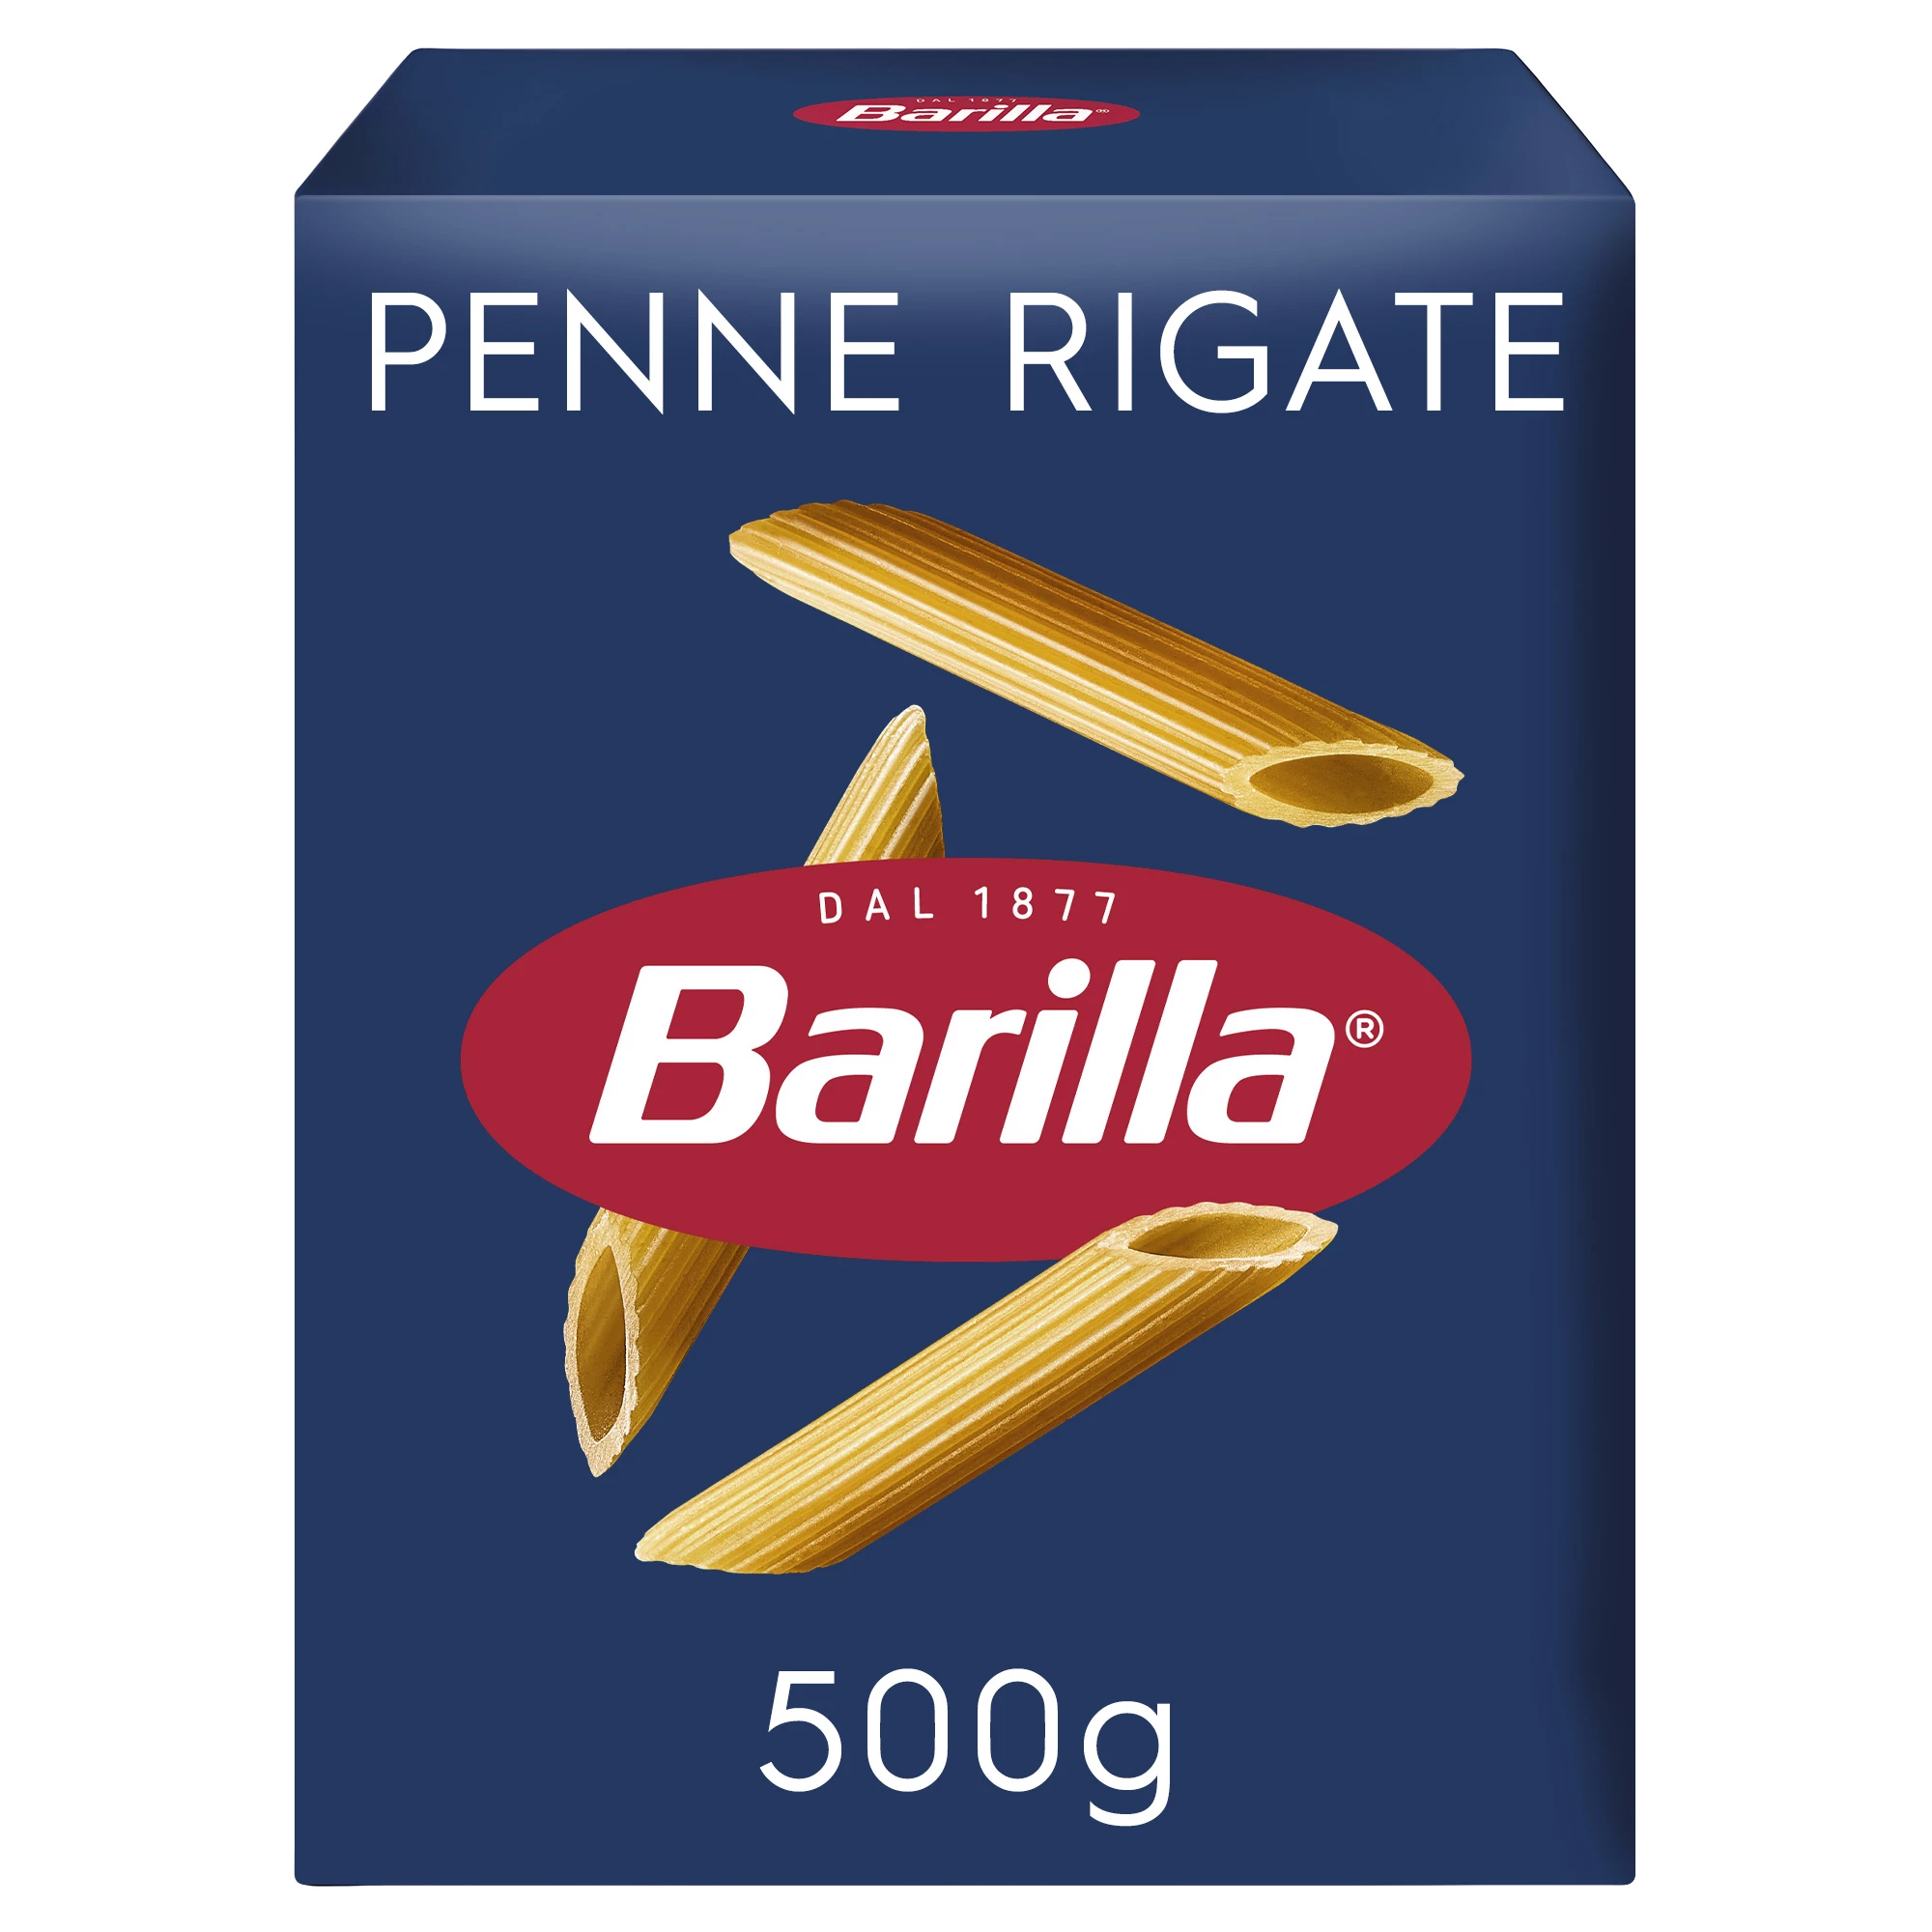 Mì ống Penne Rigate, 500g - BARILLA